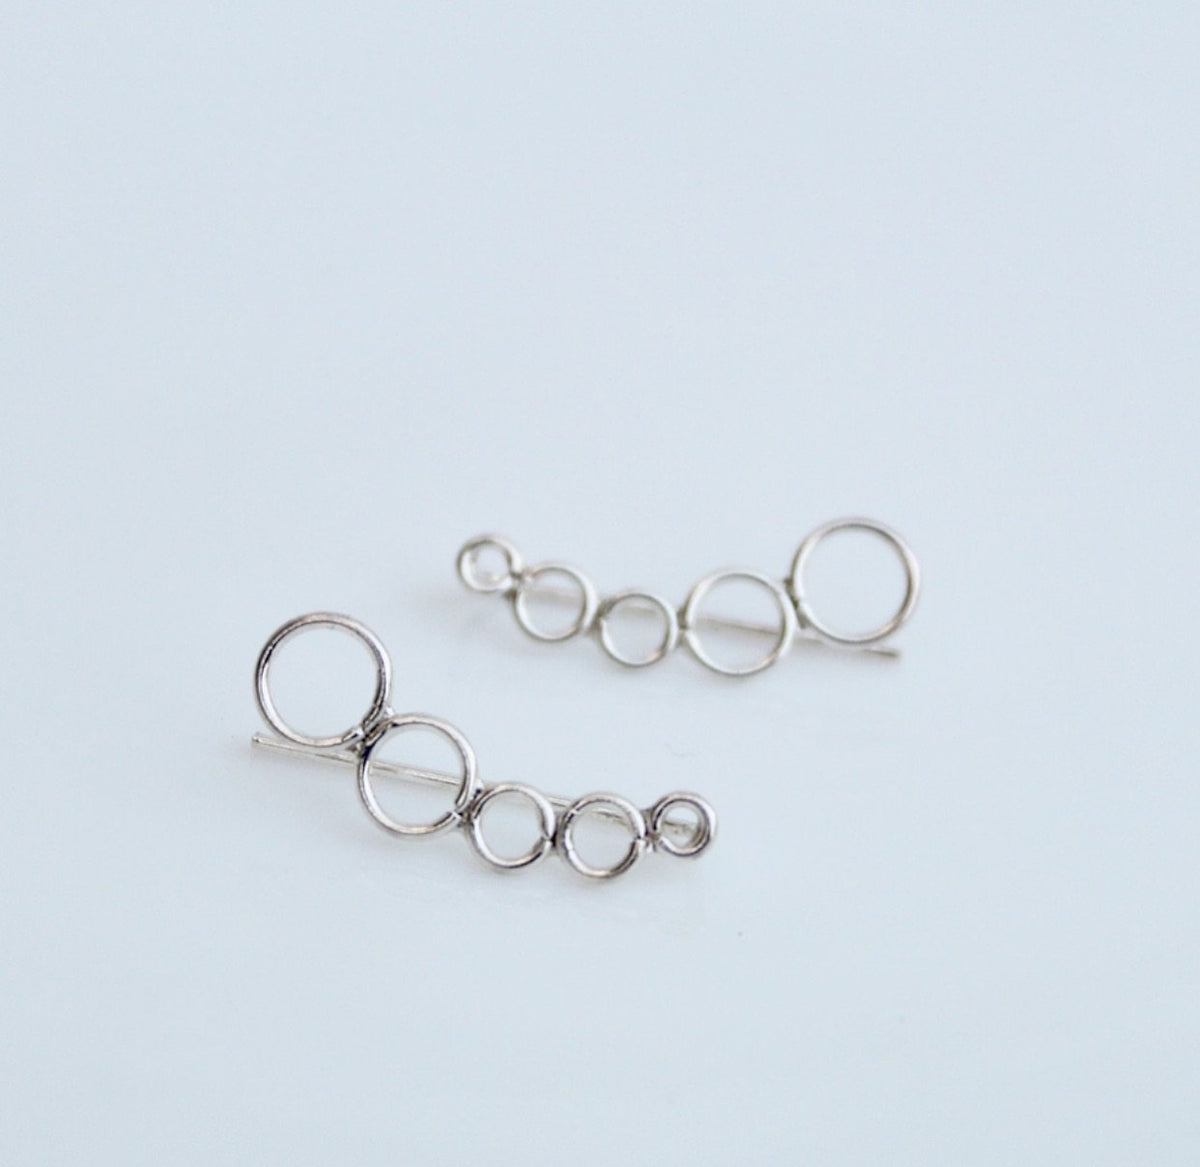 Bubbly Chic ear crawler, ear pins, hipster jewelry, edgy earrings, piercings, blogger style, street style ring, influencer jewelry, adjustable earrings, festival fashion, gifts for her, sterling silver earrings, ear crawler*, fashionable earrings, influencer jewelry, trendy jewelry  by KesleyBoutique.com, Girlwith3jobs.com